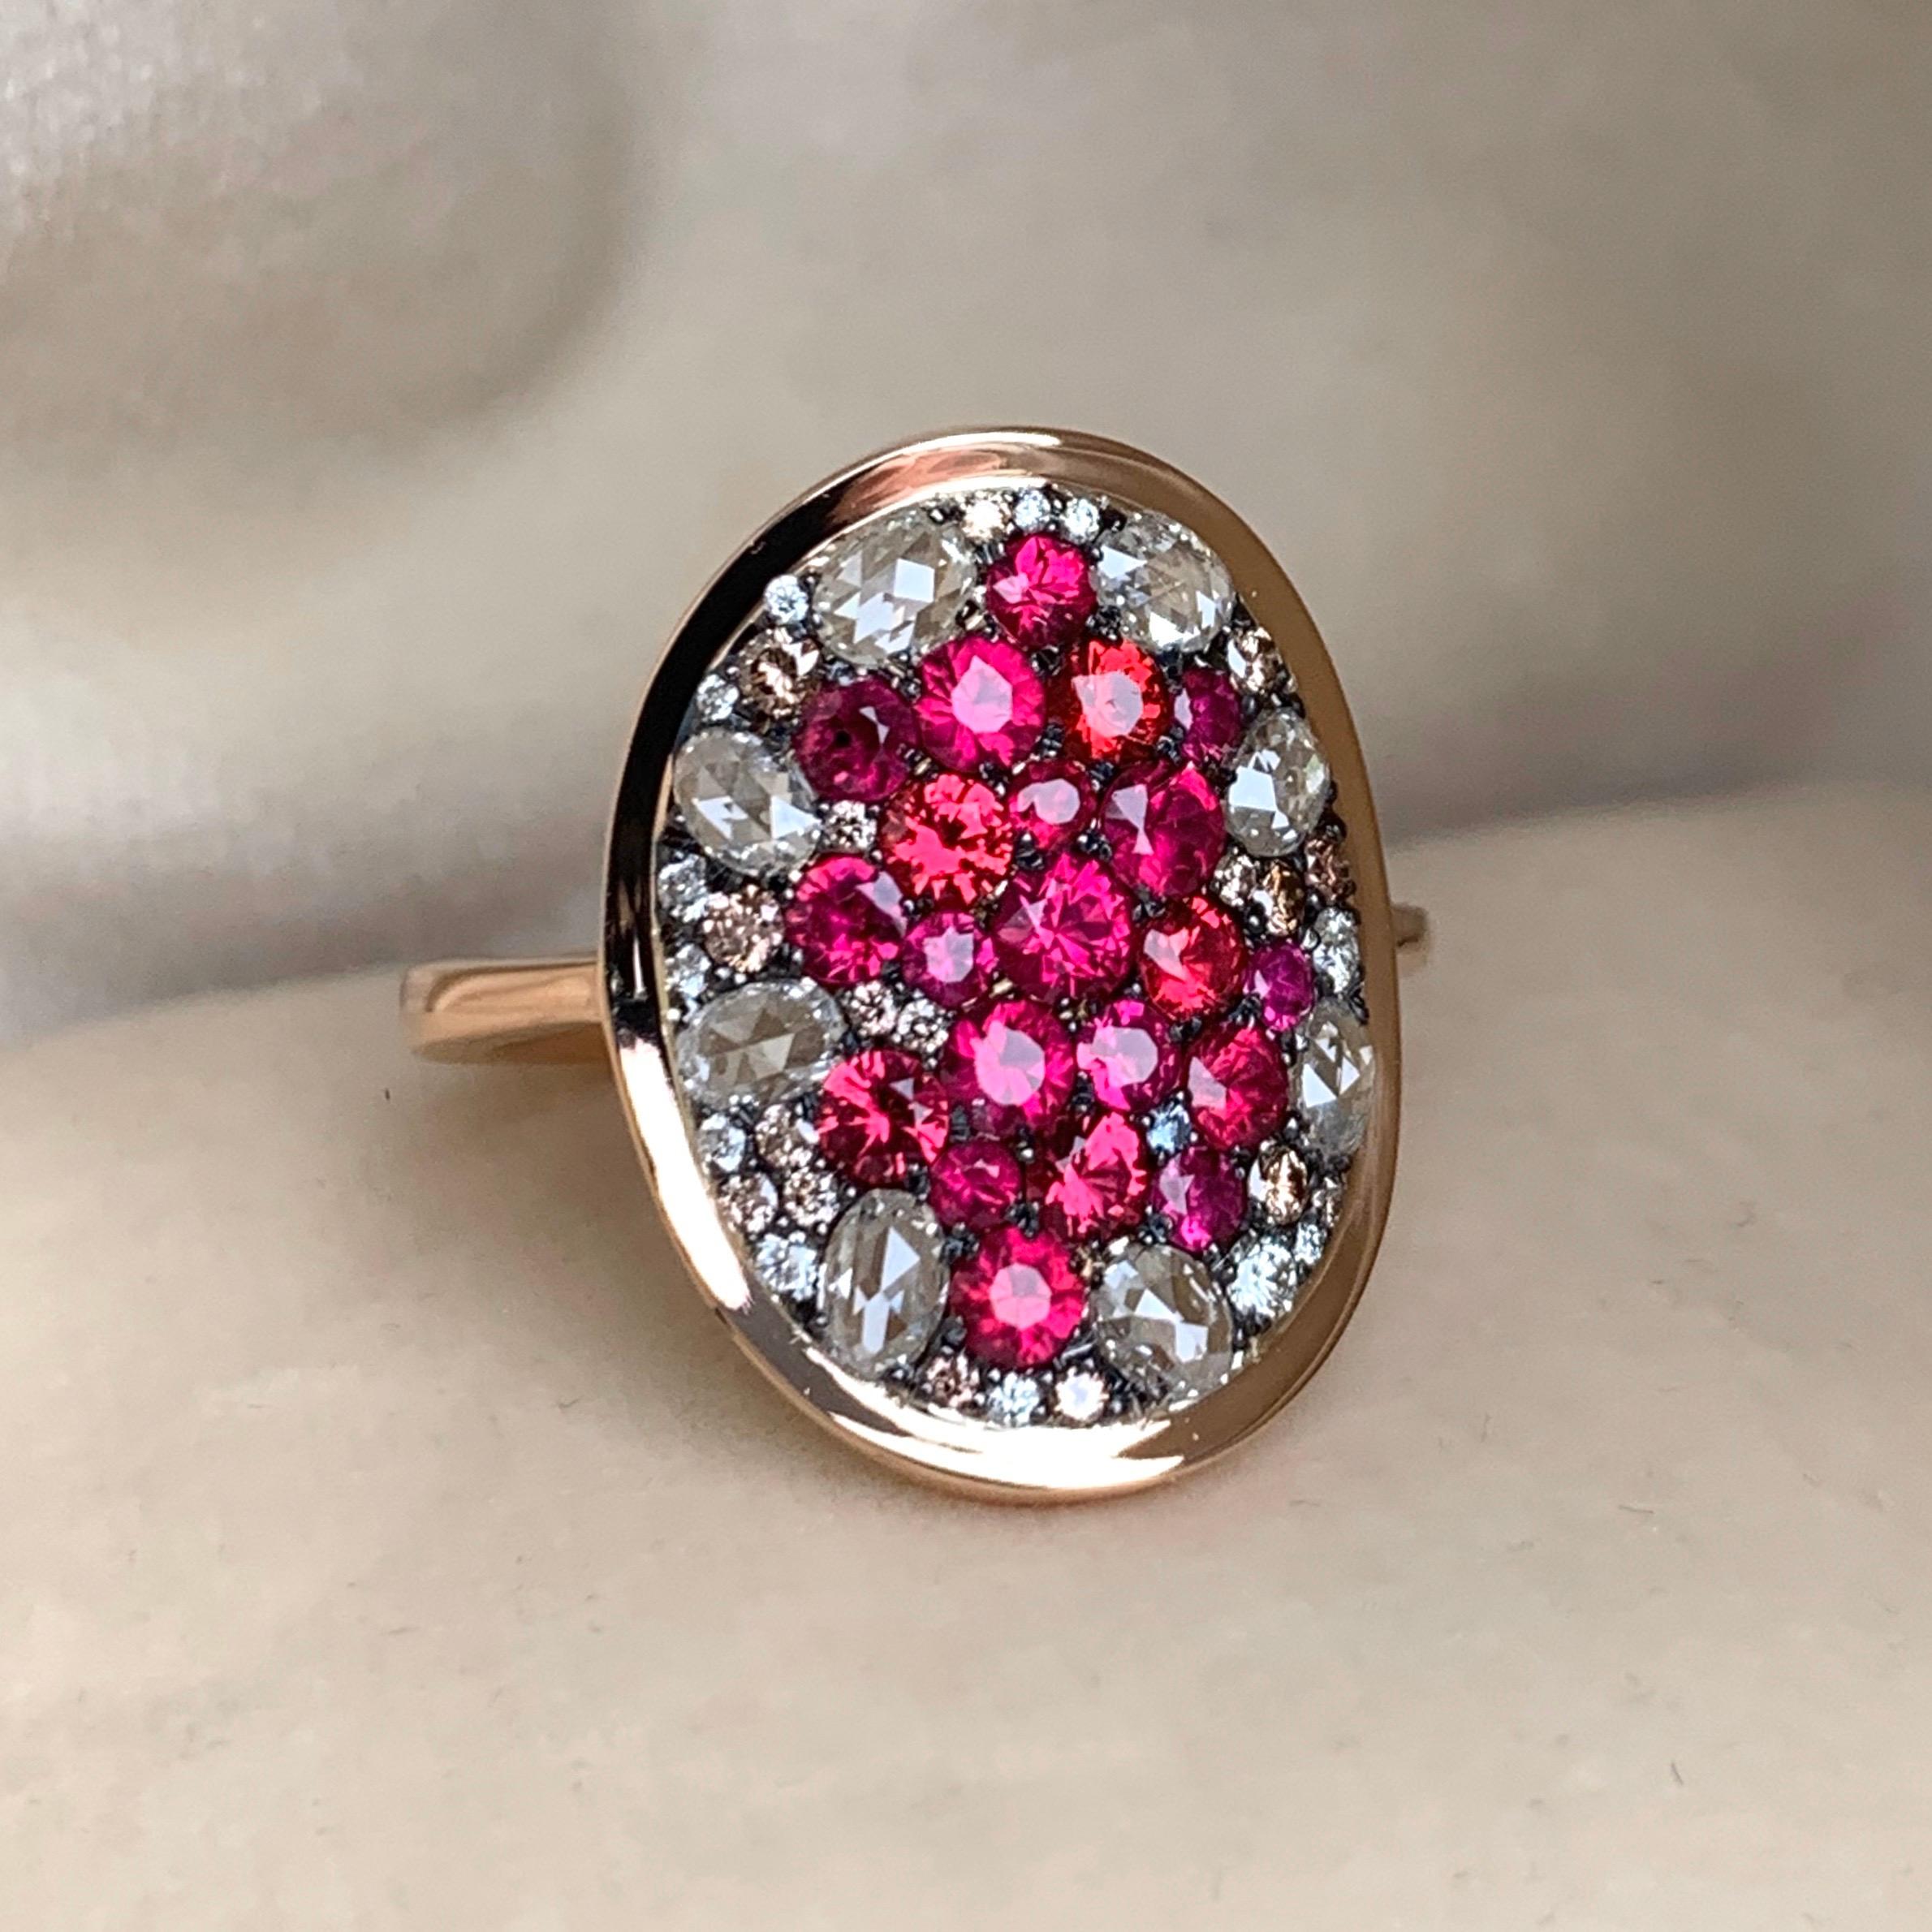 Art Nouveau Pigeon's Blood Red Ruby Red Spinel, Pink Diamond and White Rose-Cut Diamond Ring